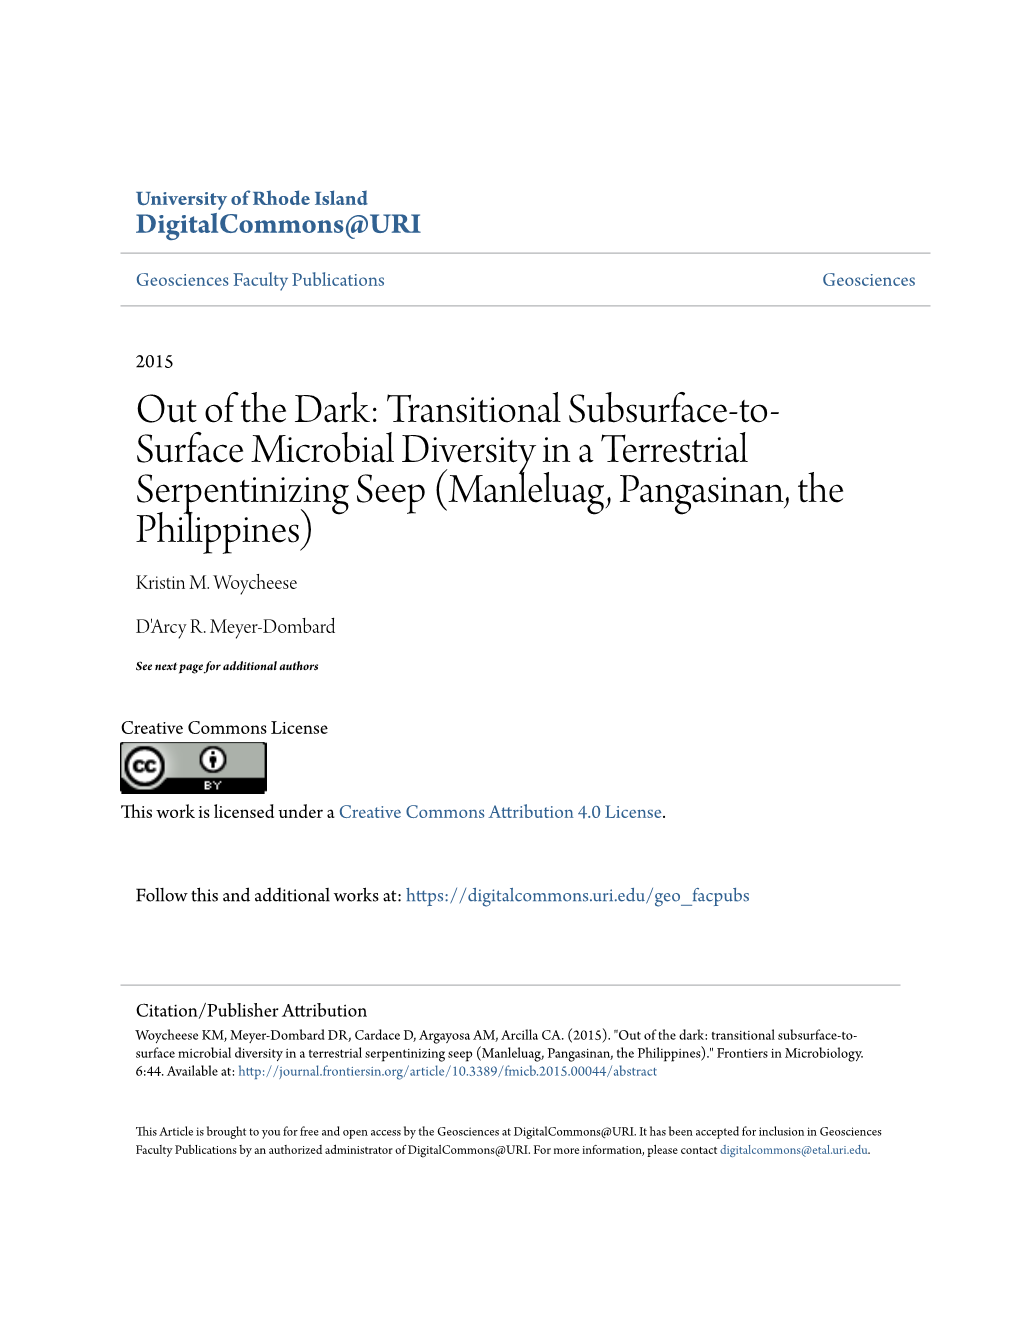 Out of the Dark: Transitional Subsurface-To-Surface Microbial Diversity in a Terrestrial Serpentinizing Seep (Manleluag, Pangasinan, the Philippines)